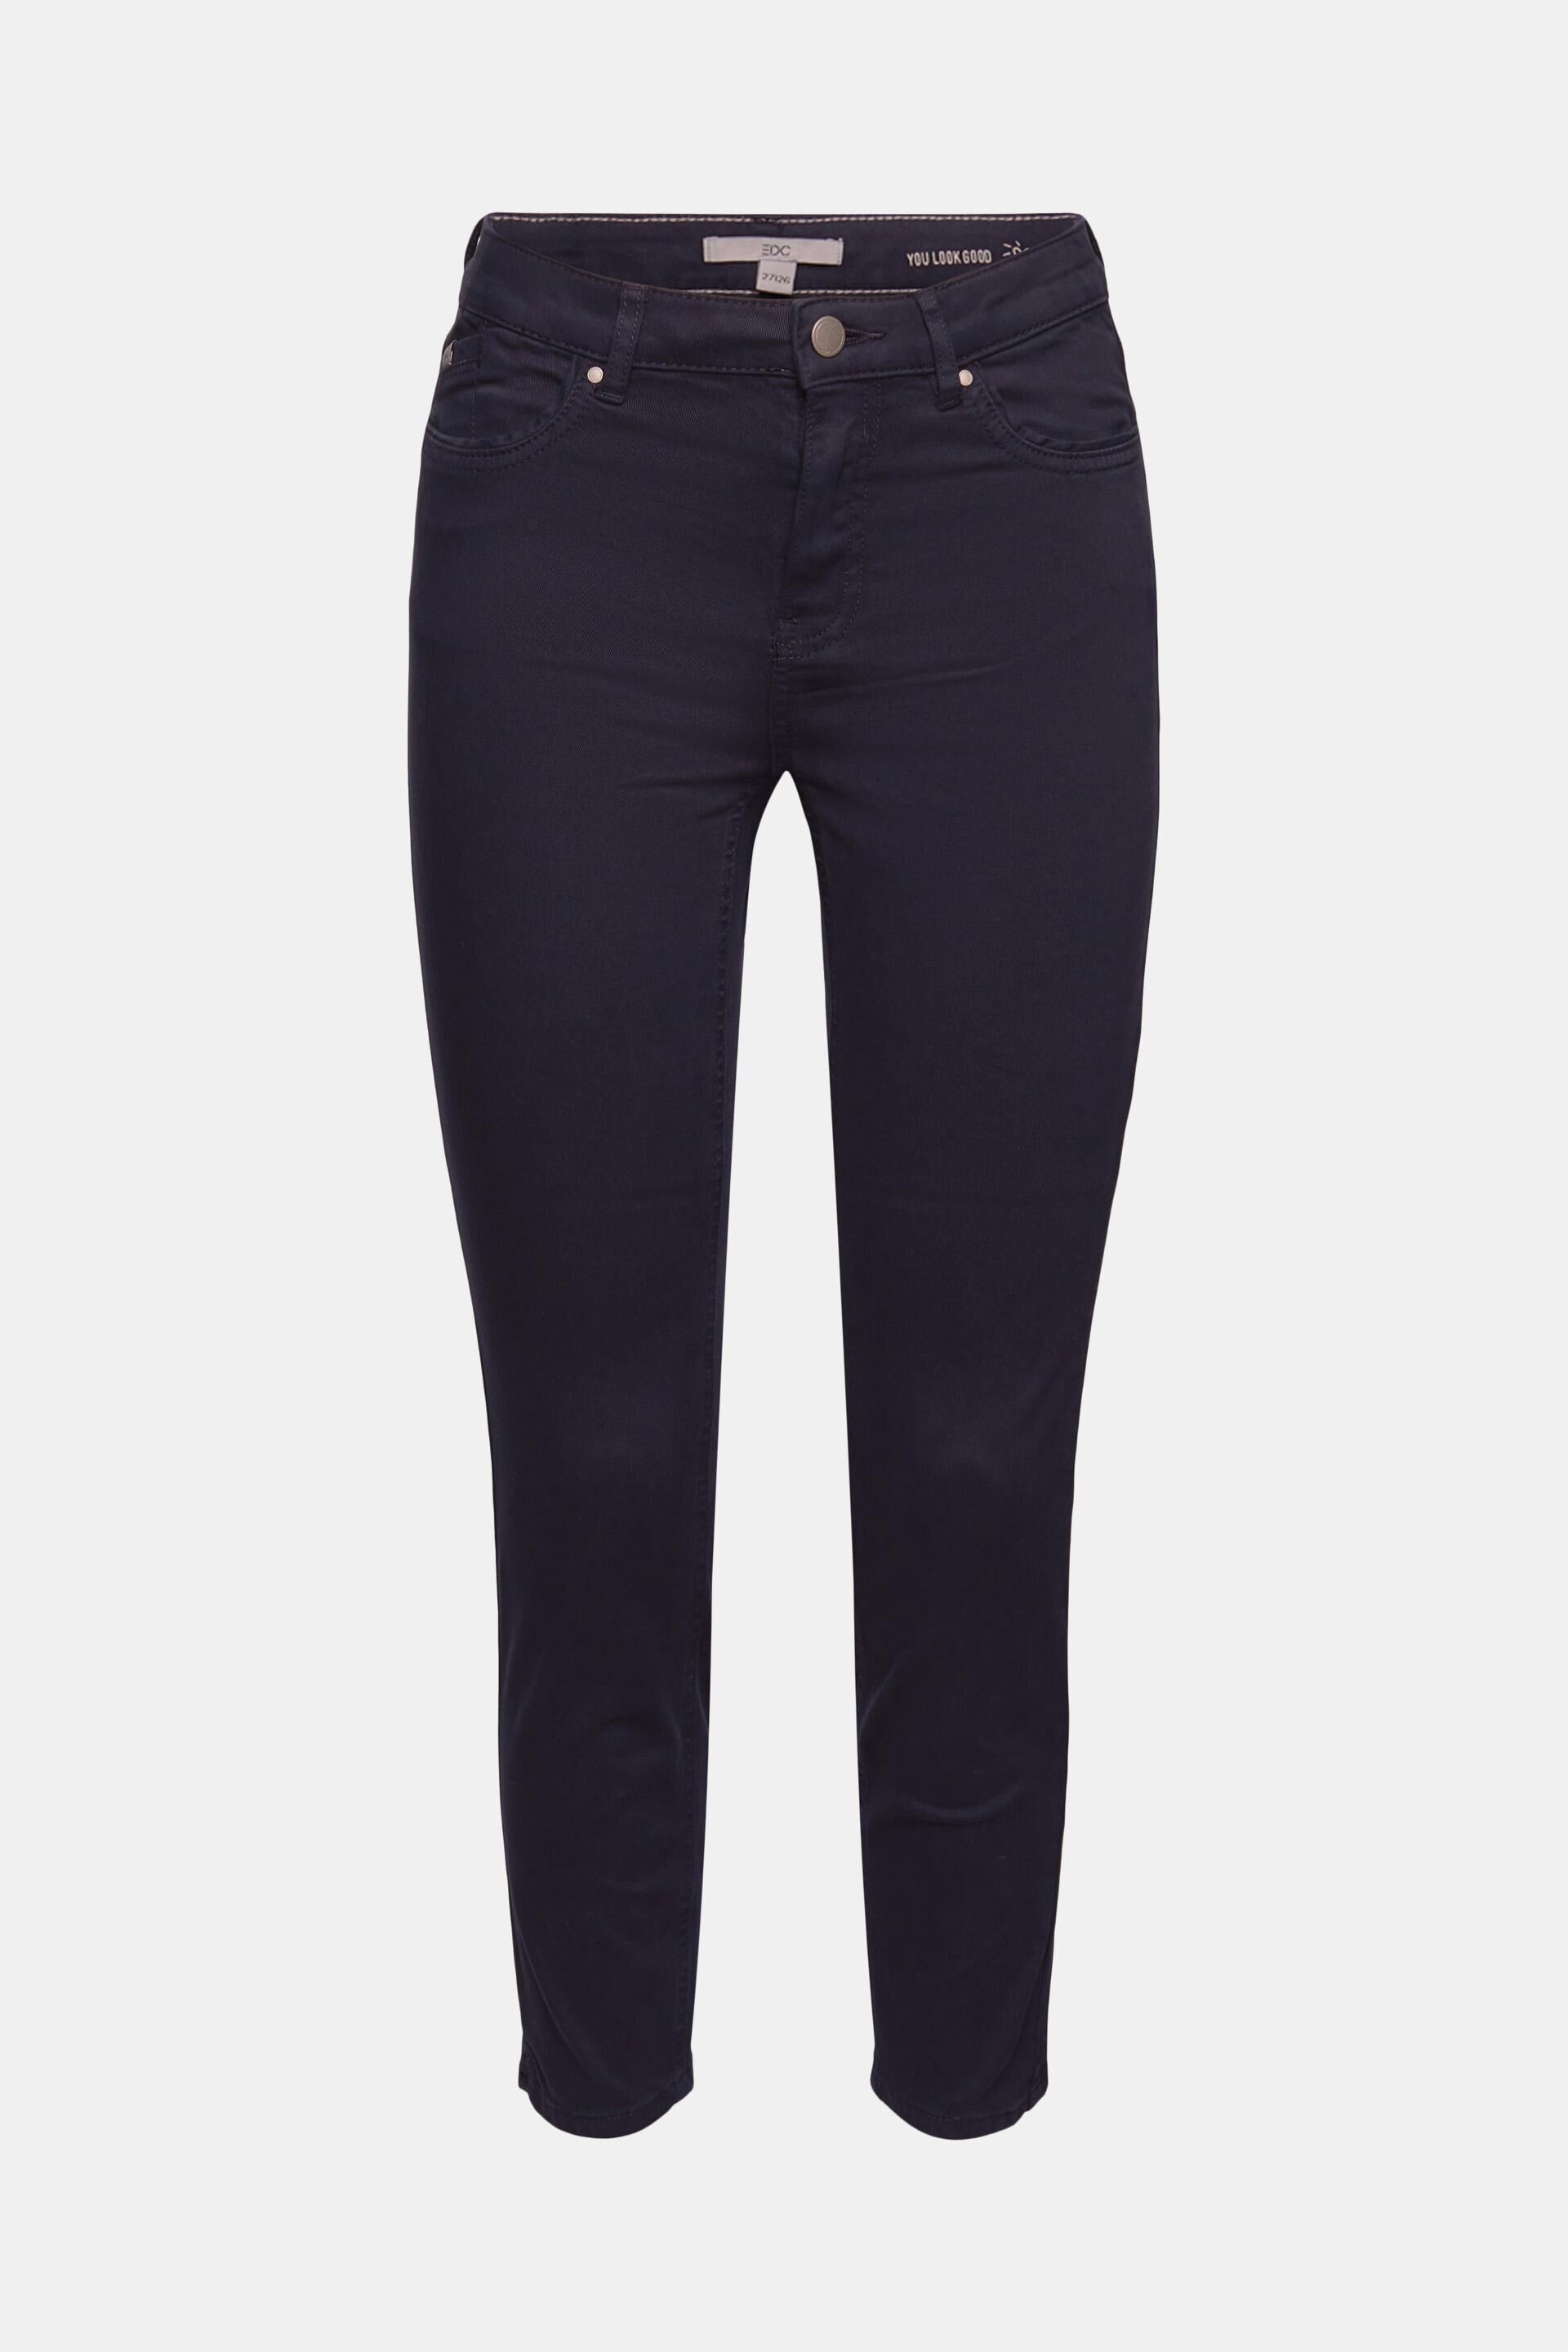 Le Chef Ladies Stretch Trousers